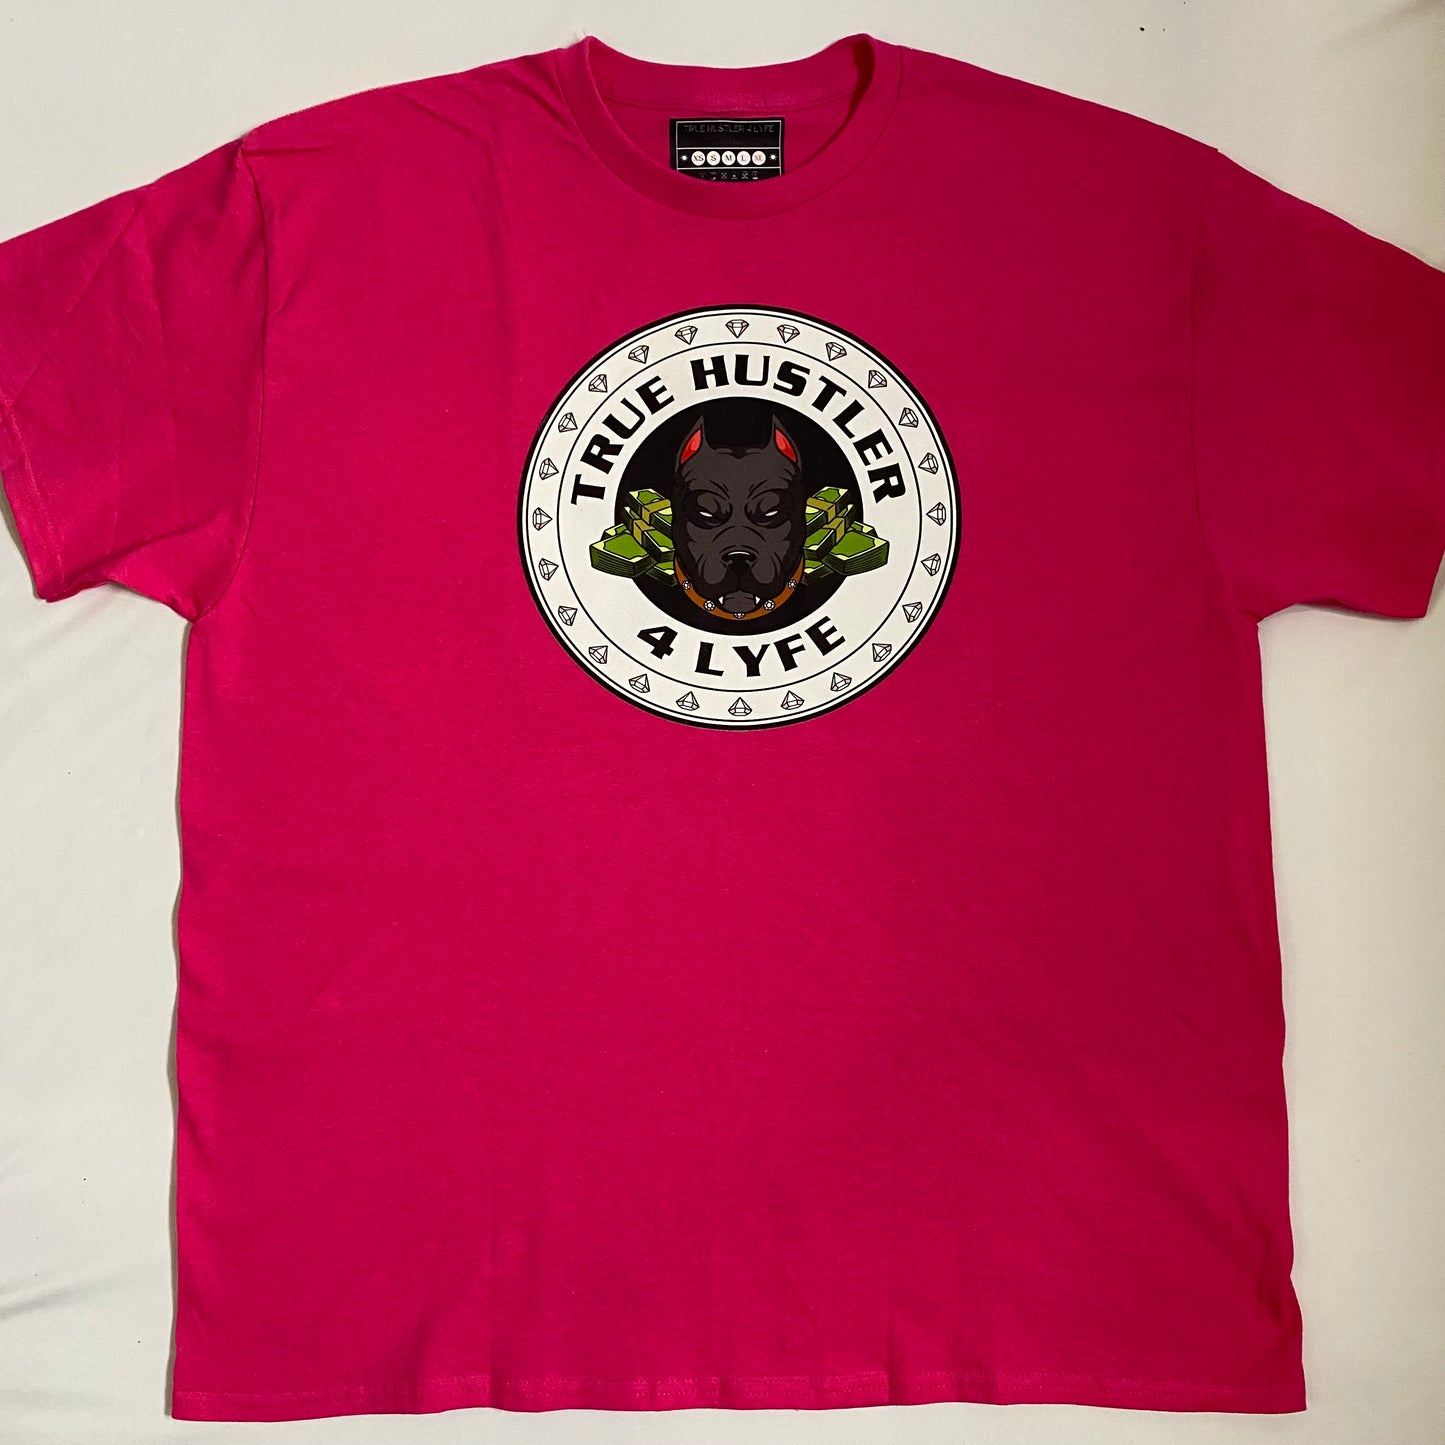 "TH4L Grind Collection Unisex Graphic Tees - Hot Pink Heavy Duty Cotton T-Shirt and White Grind Logo Tee"